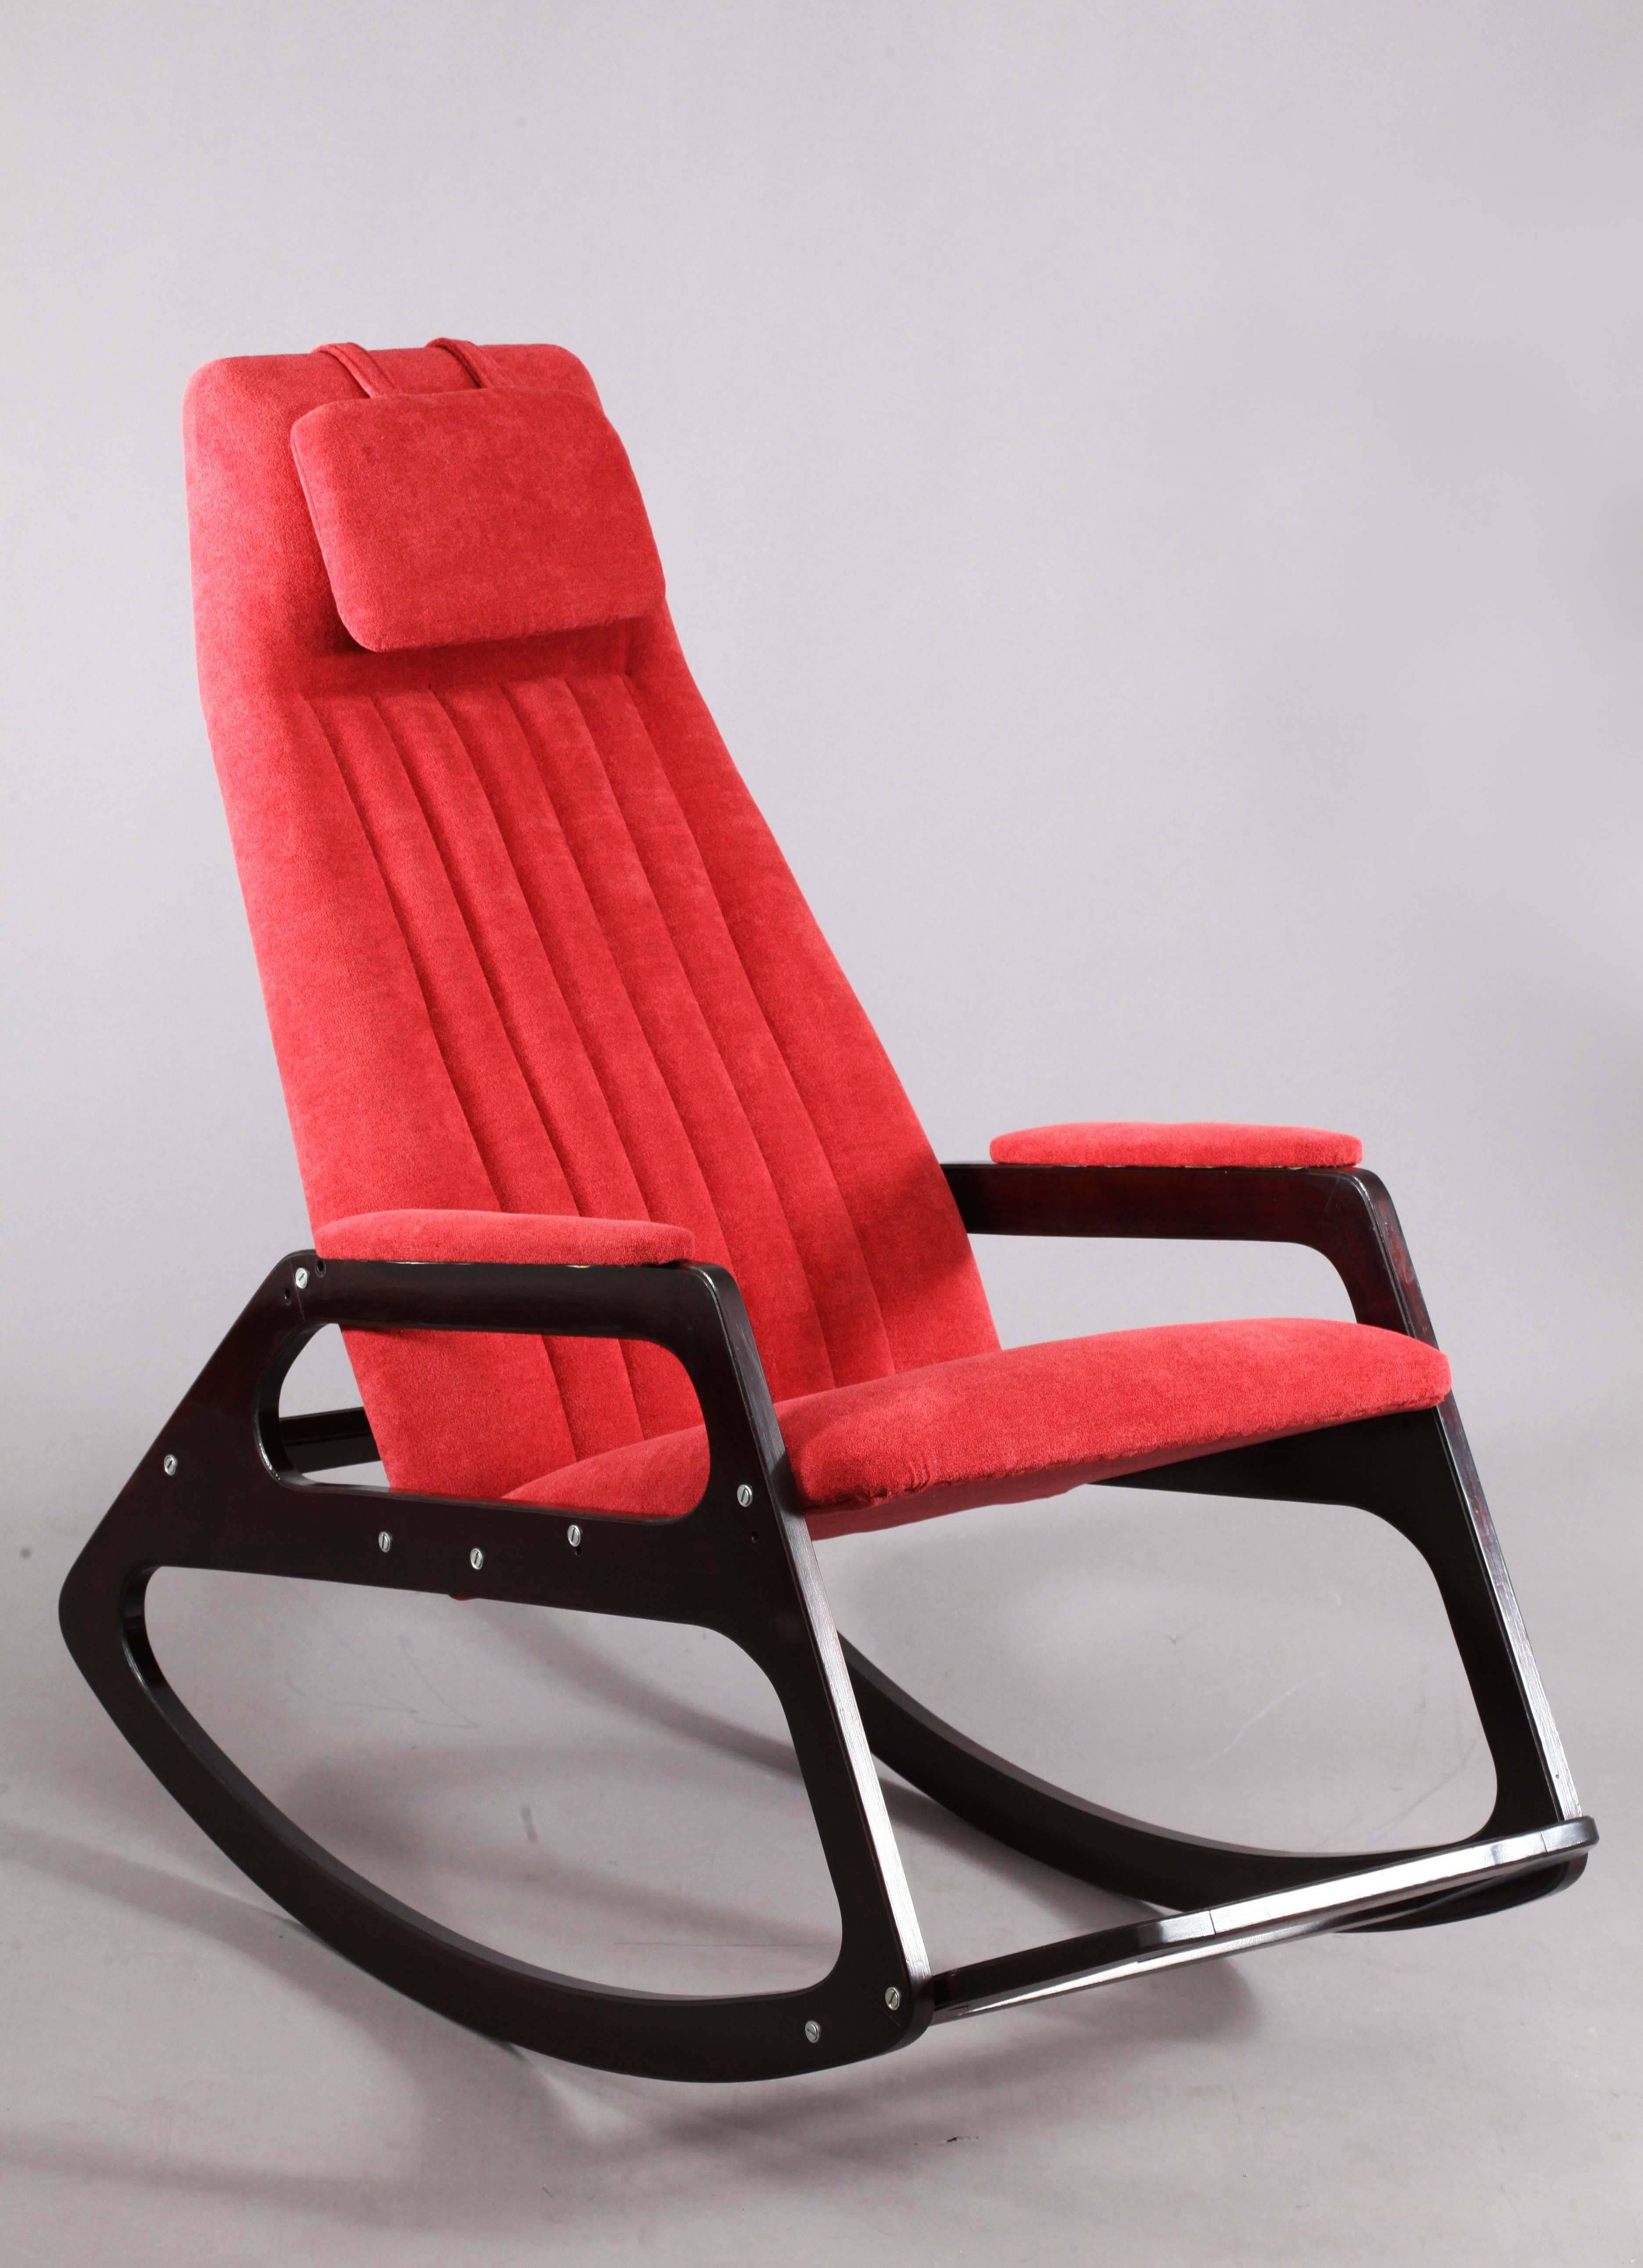 Rocking chair,
attributed to Gianfranco Frattini,
Italy, 1960.
Solid wood, red fabric.